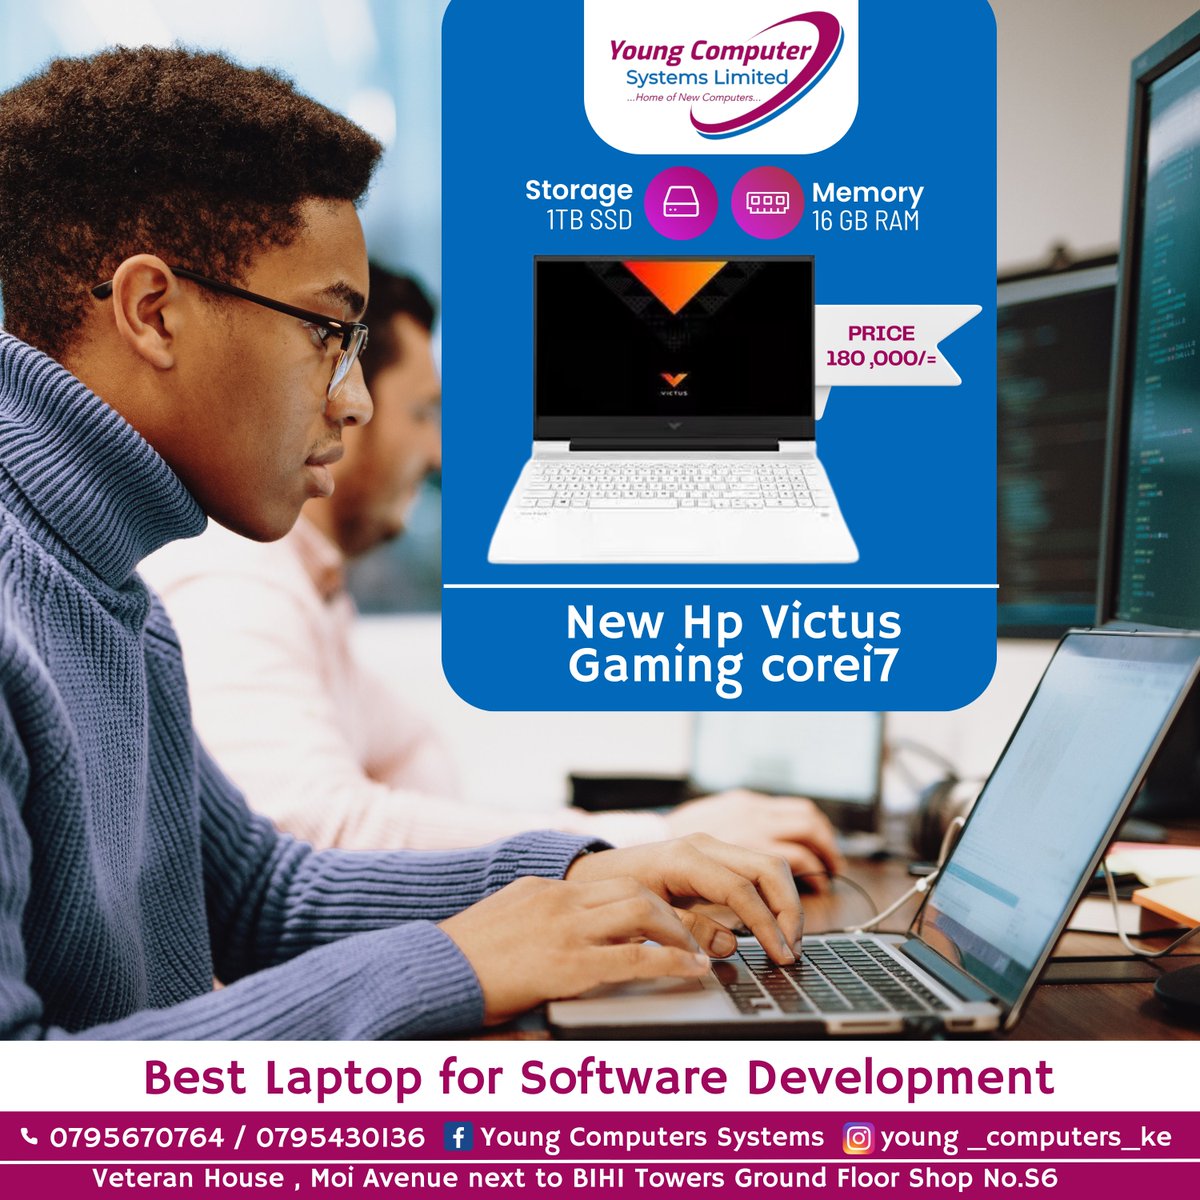 The New HP Victus Corei7 claims the top spot for software developers with its unmatched speed, efficiency, and overall excellence.
#softwaredeveopers #developerlaptops #laptopsforstudents #hplaptopskenya #newlaptop #youngcomputerssystems #refurbishedlaptops #hpvictus